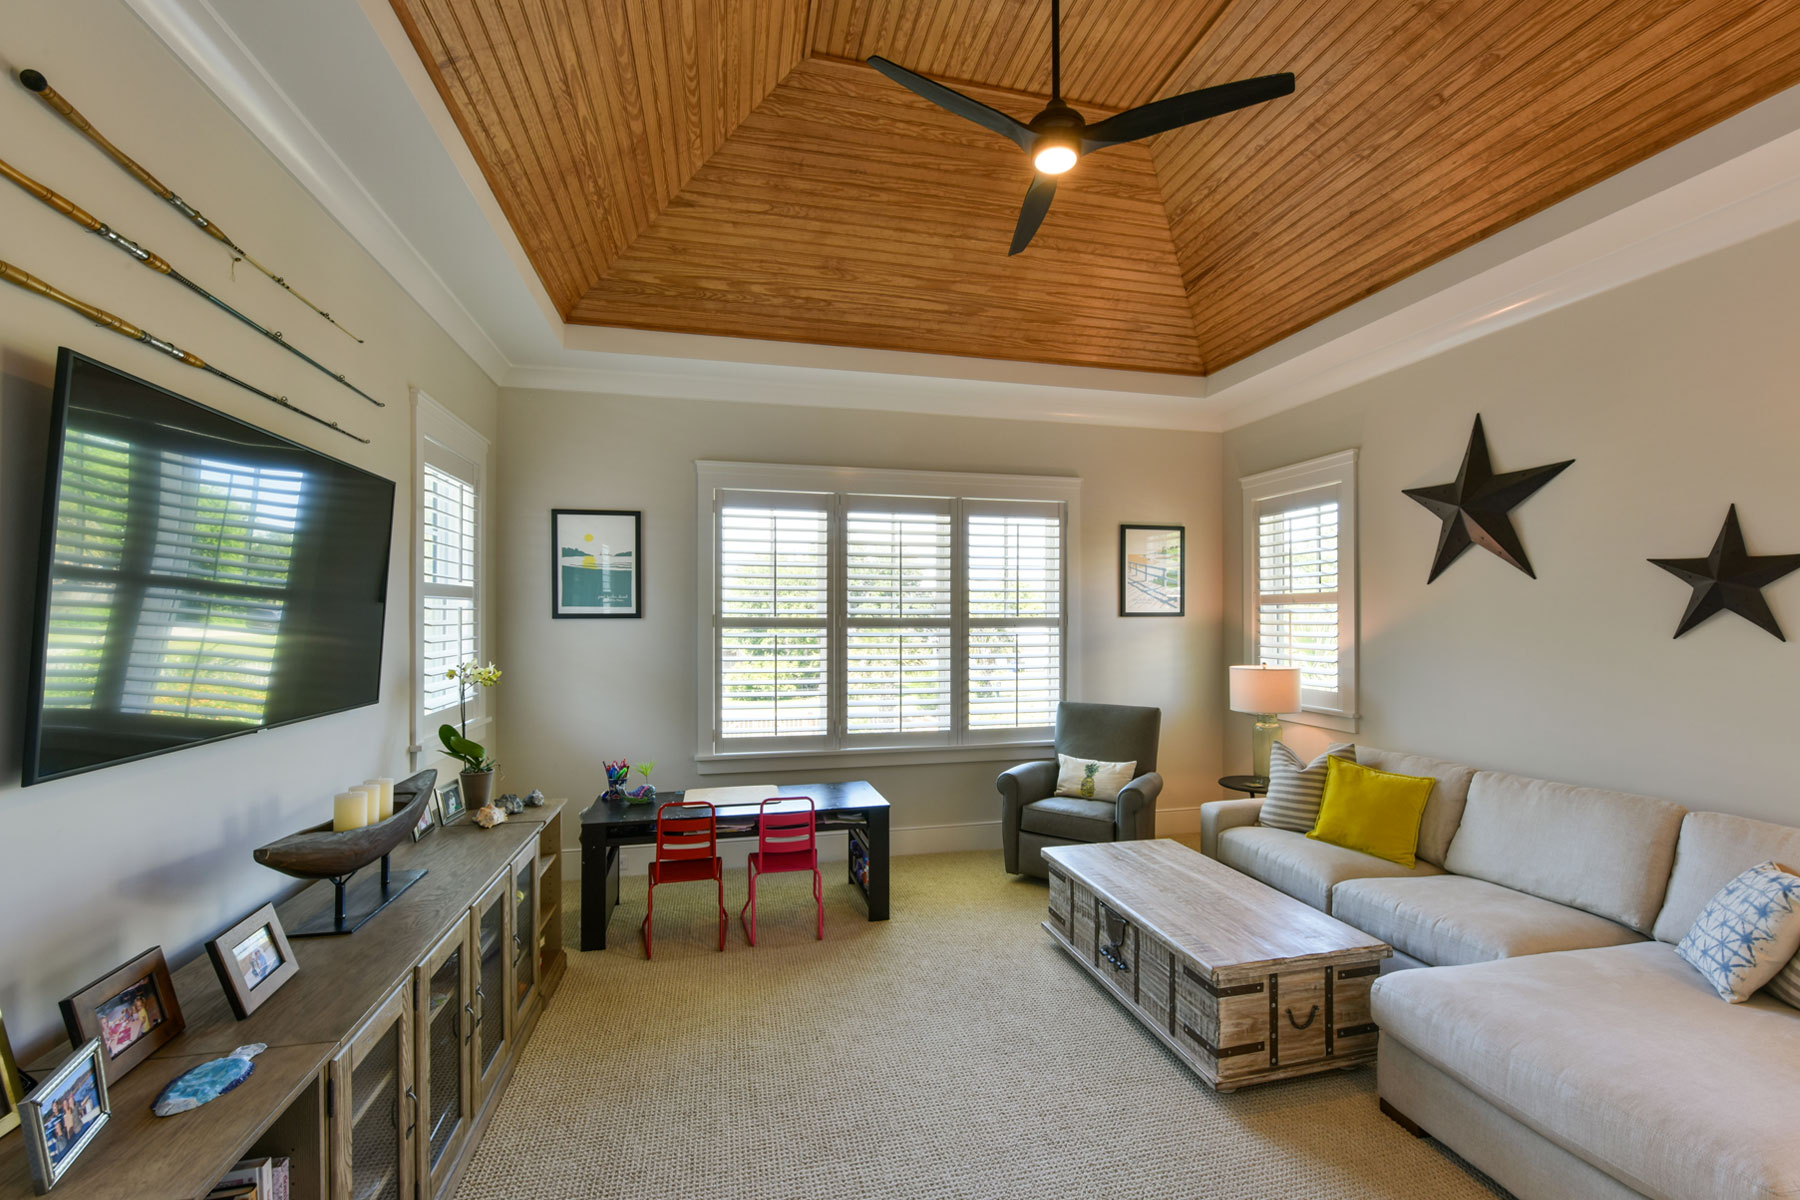 Kids family room with vaulted, wood ceiling